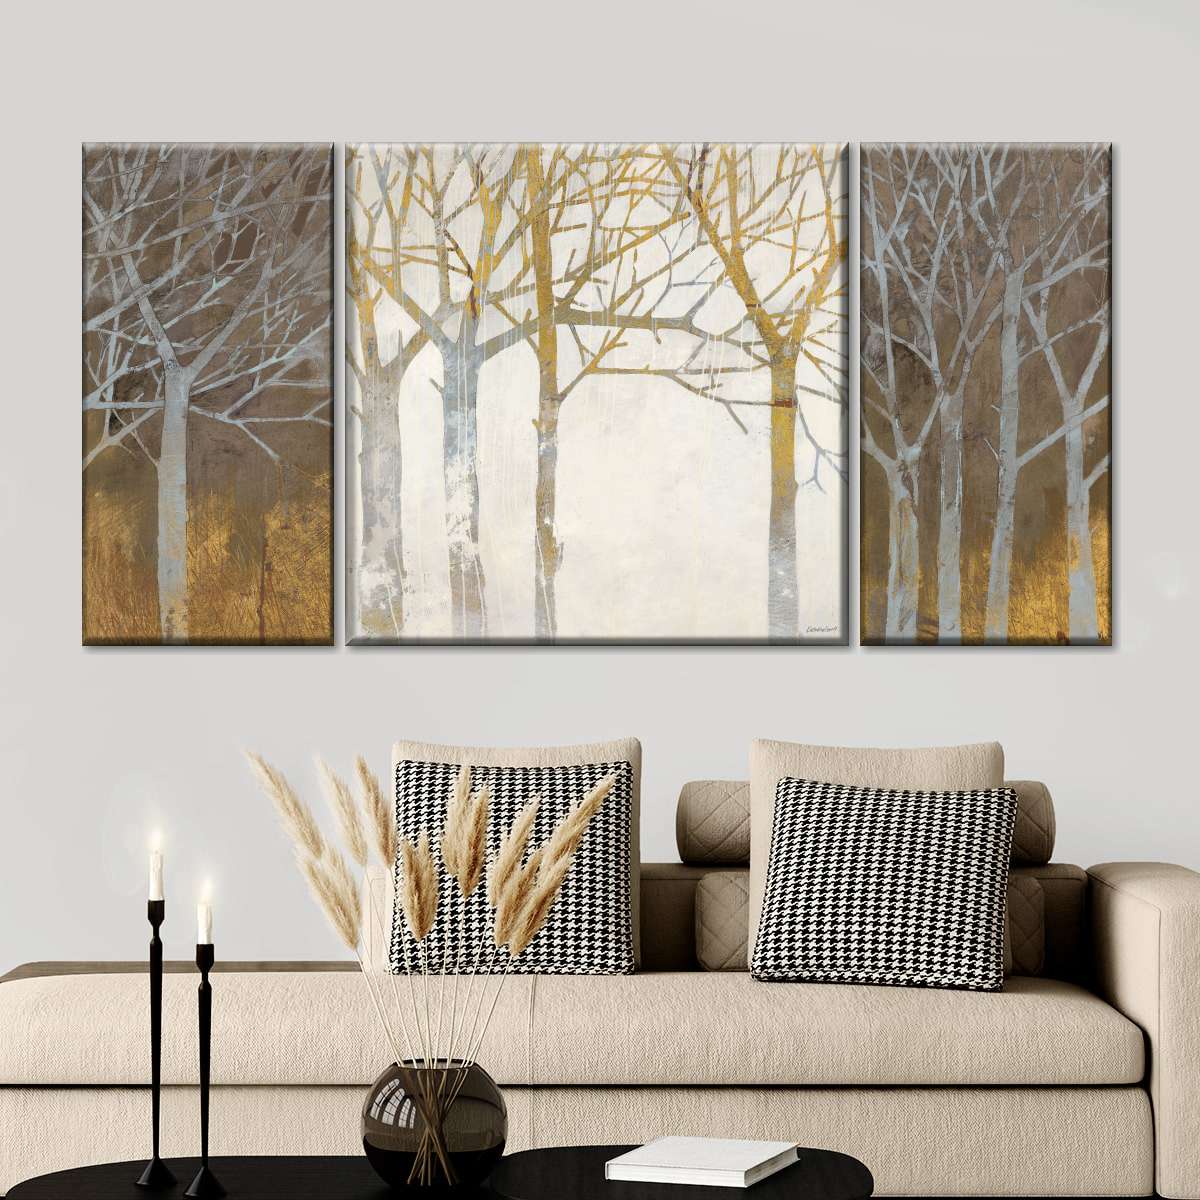 Night And Day Wall Art: Canvas Prints, Art Prints & Framed Canvas